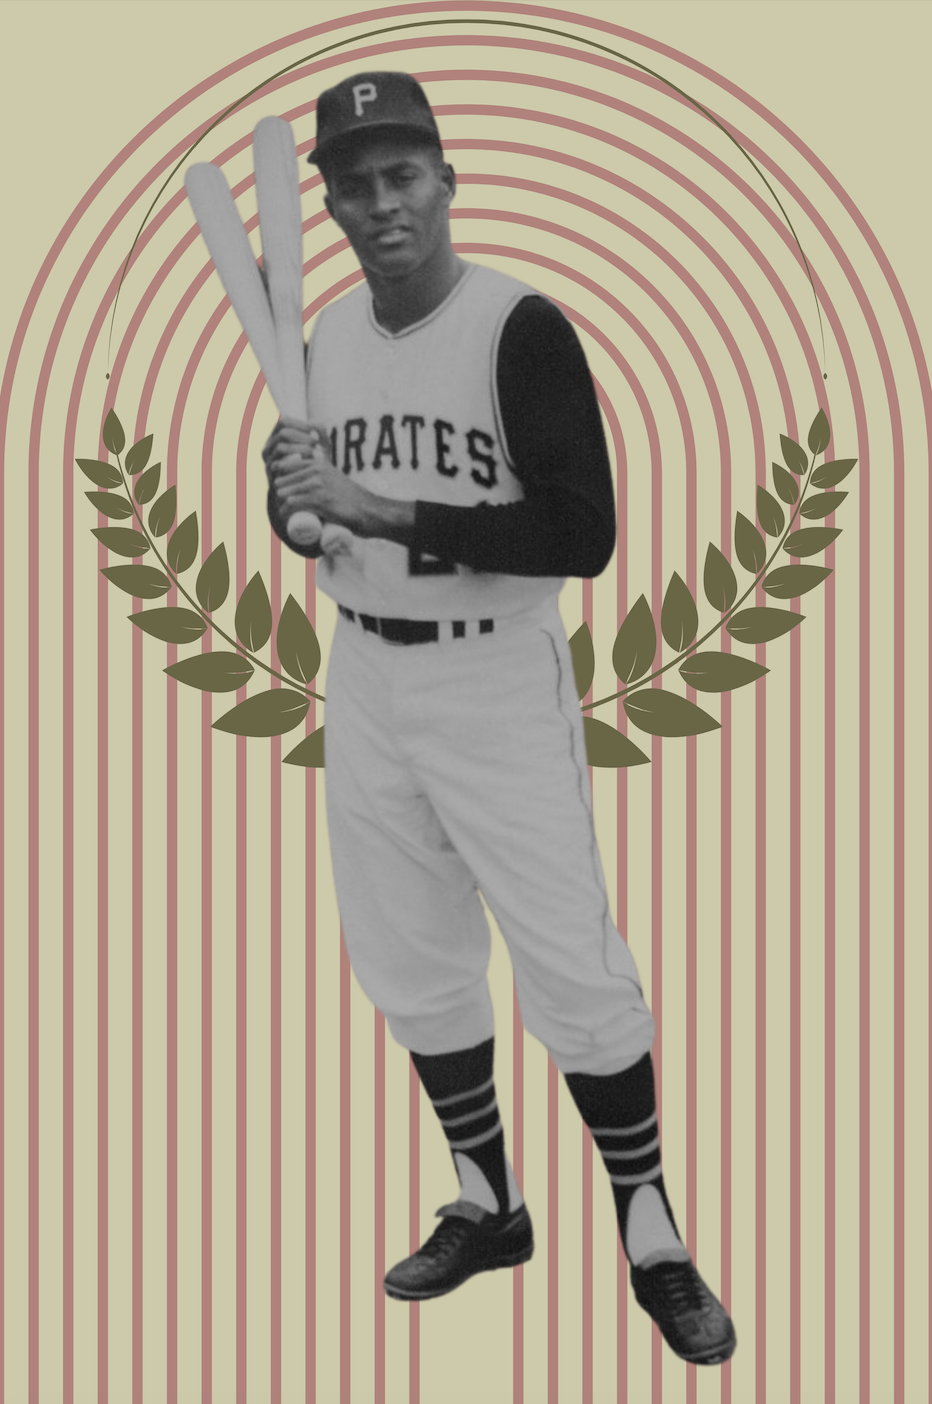 Celebrating Hispanic Heritage Month  LEARN ABOUT ROBERTO CLEMENTE 